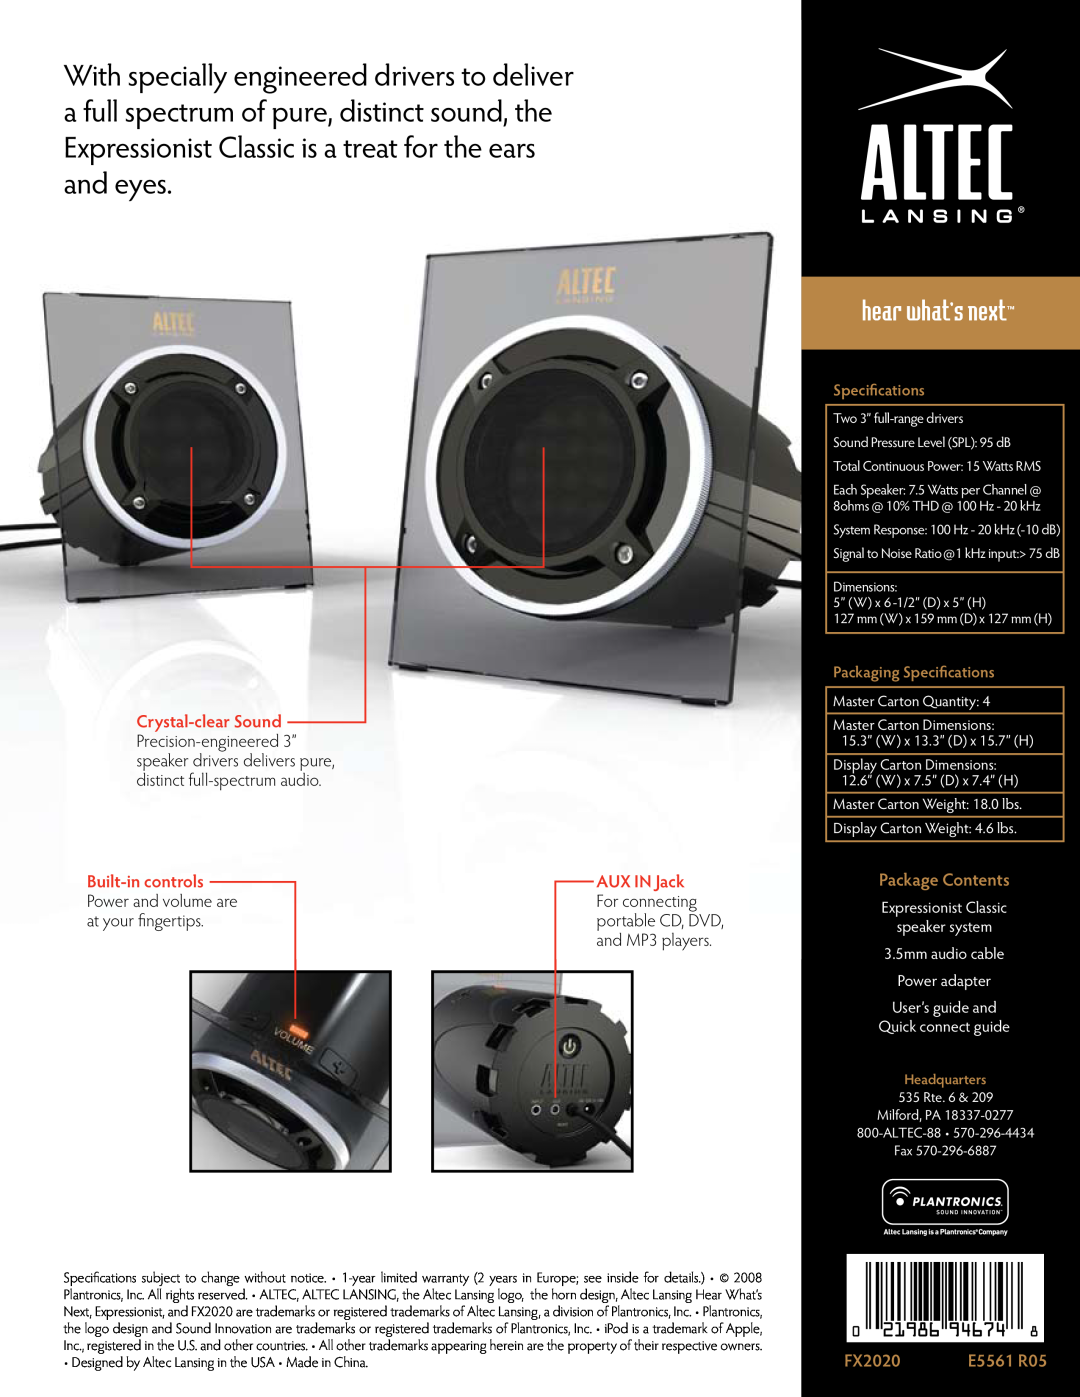 Altec Lansing FX2020 manual Crystal-clearSound, Package Contents, Packaging Specifications, Quick connect guide 